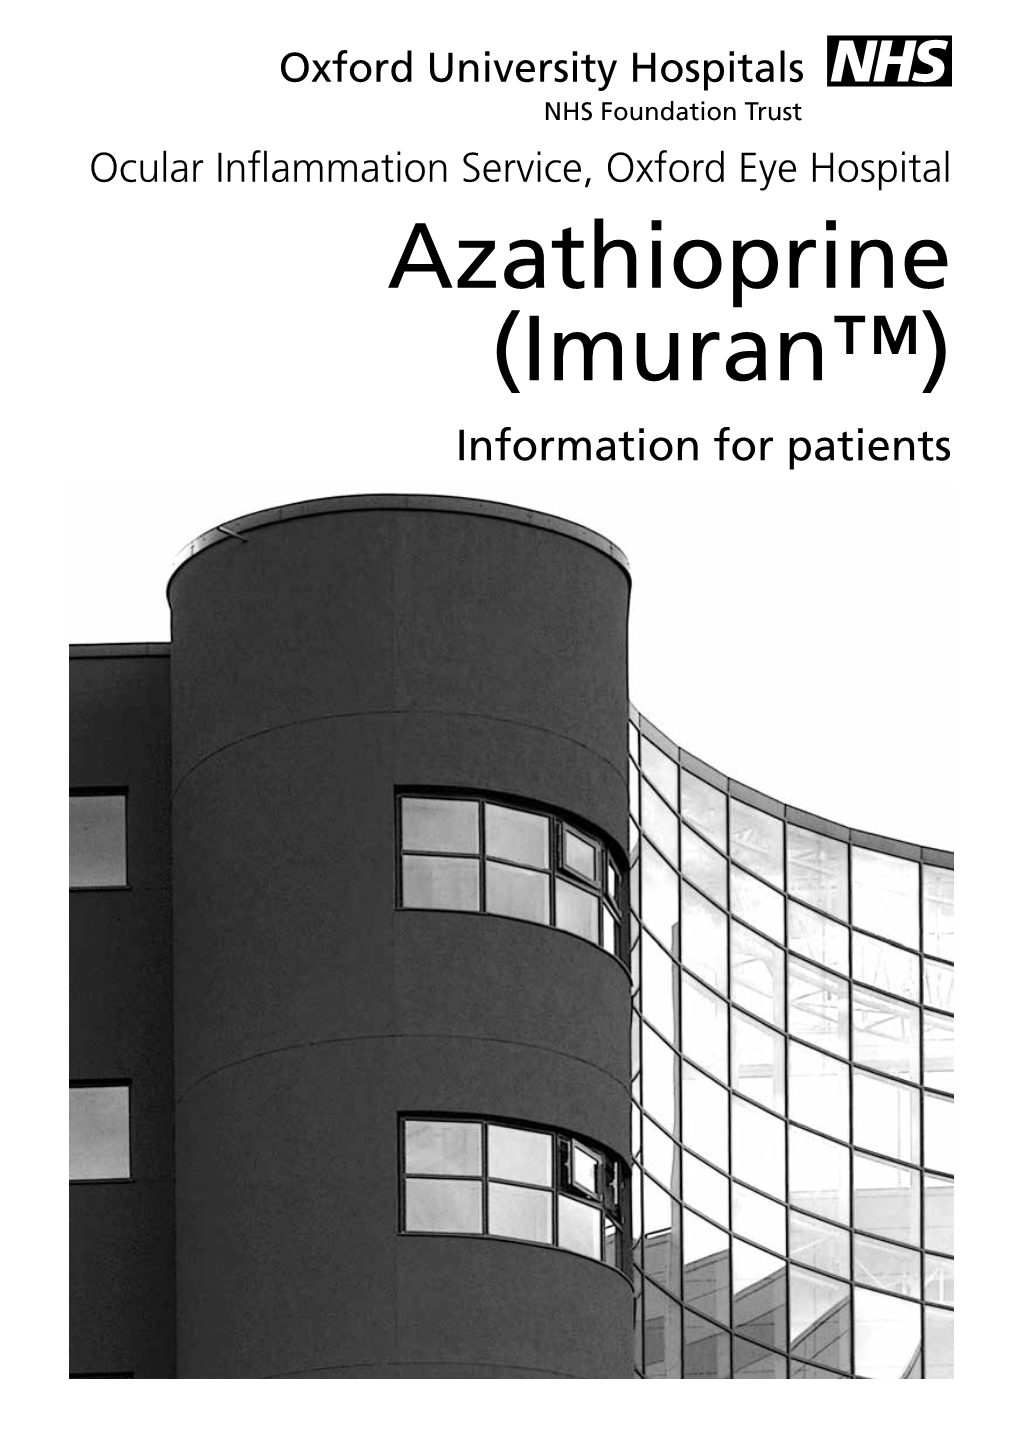 Azathioprine (Imuran™) Information for Patients Why Am I Taking Azathioprine? Your Doctor Has Prescribed Azathioprine for the Treatment of Your Eye Condition